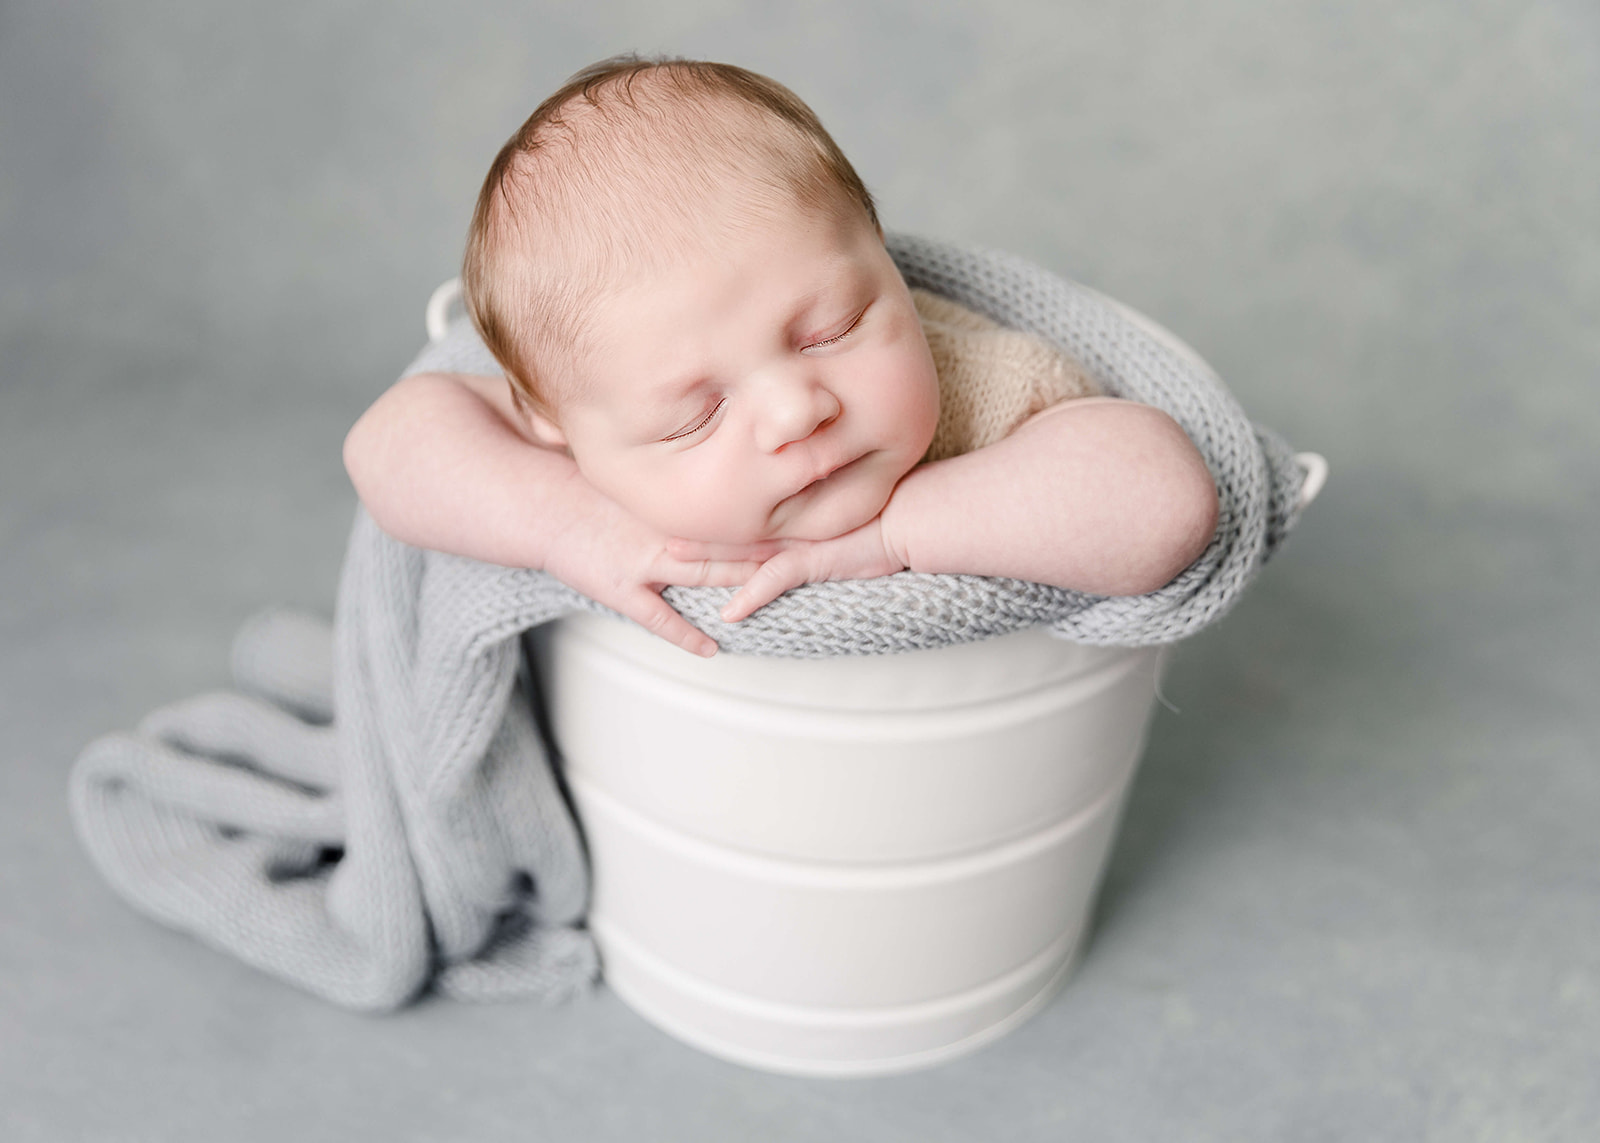 A newborn baby sleeps in a bucket wrapped in a blue blanket with head resting on its hands Irvine Pediatrician